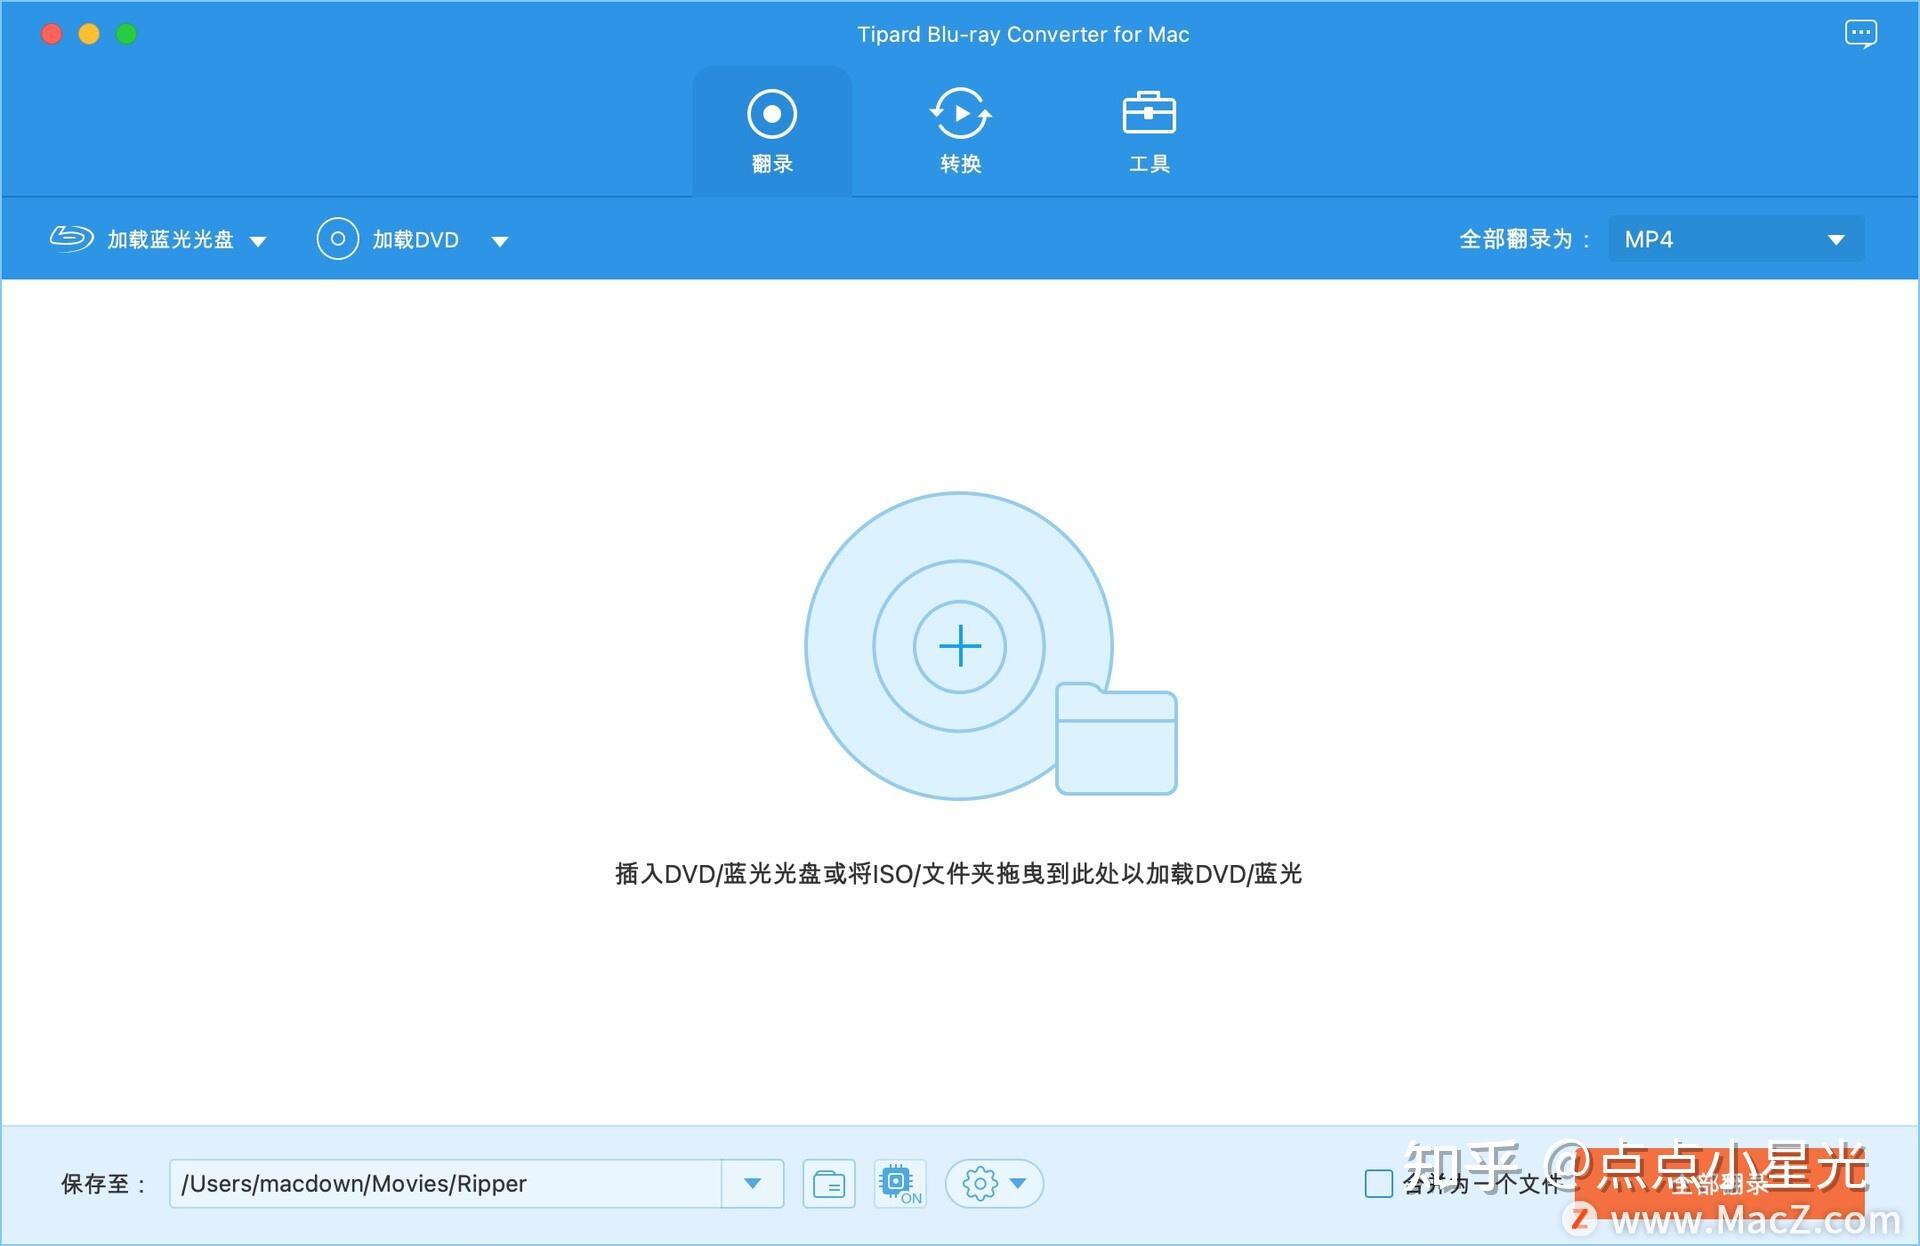 Tipard Blu-ray Converter 10.1.8 for mac download free